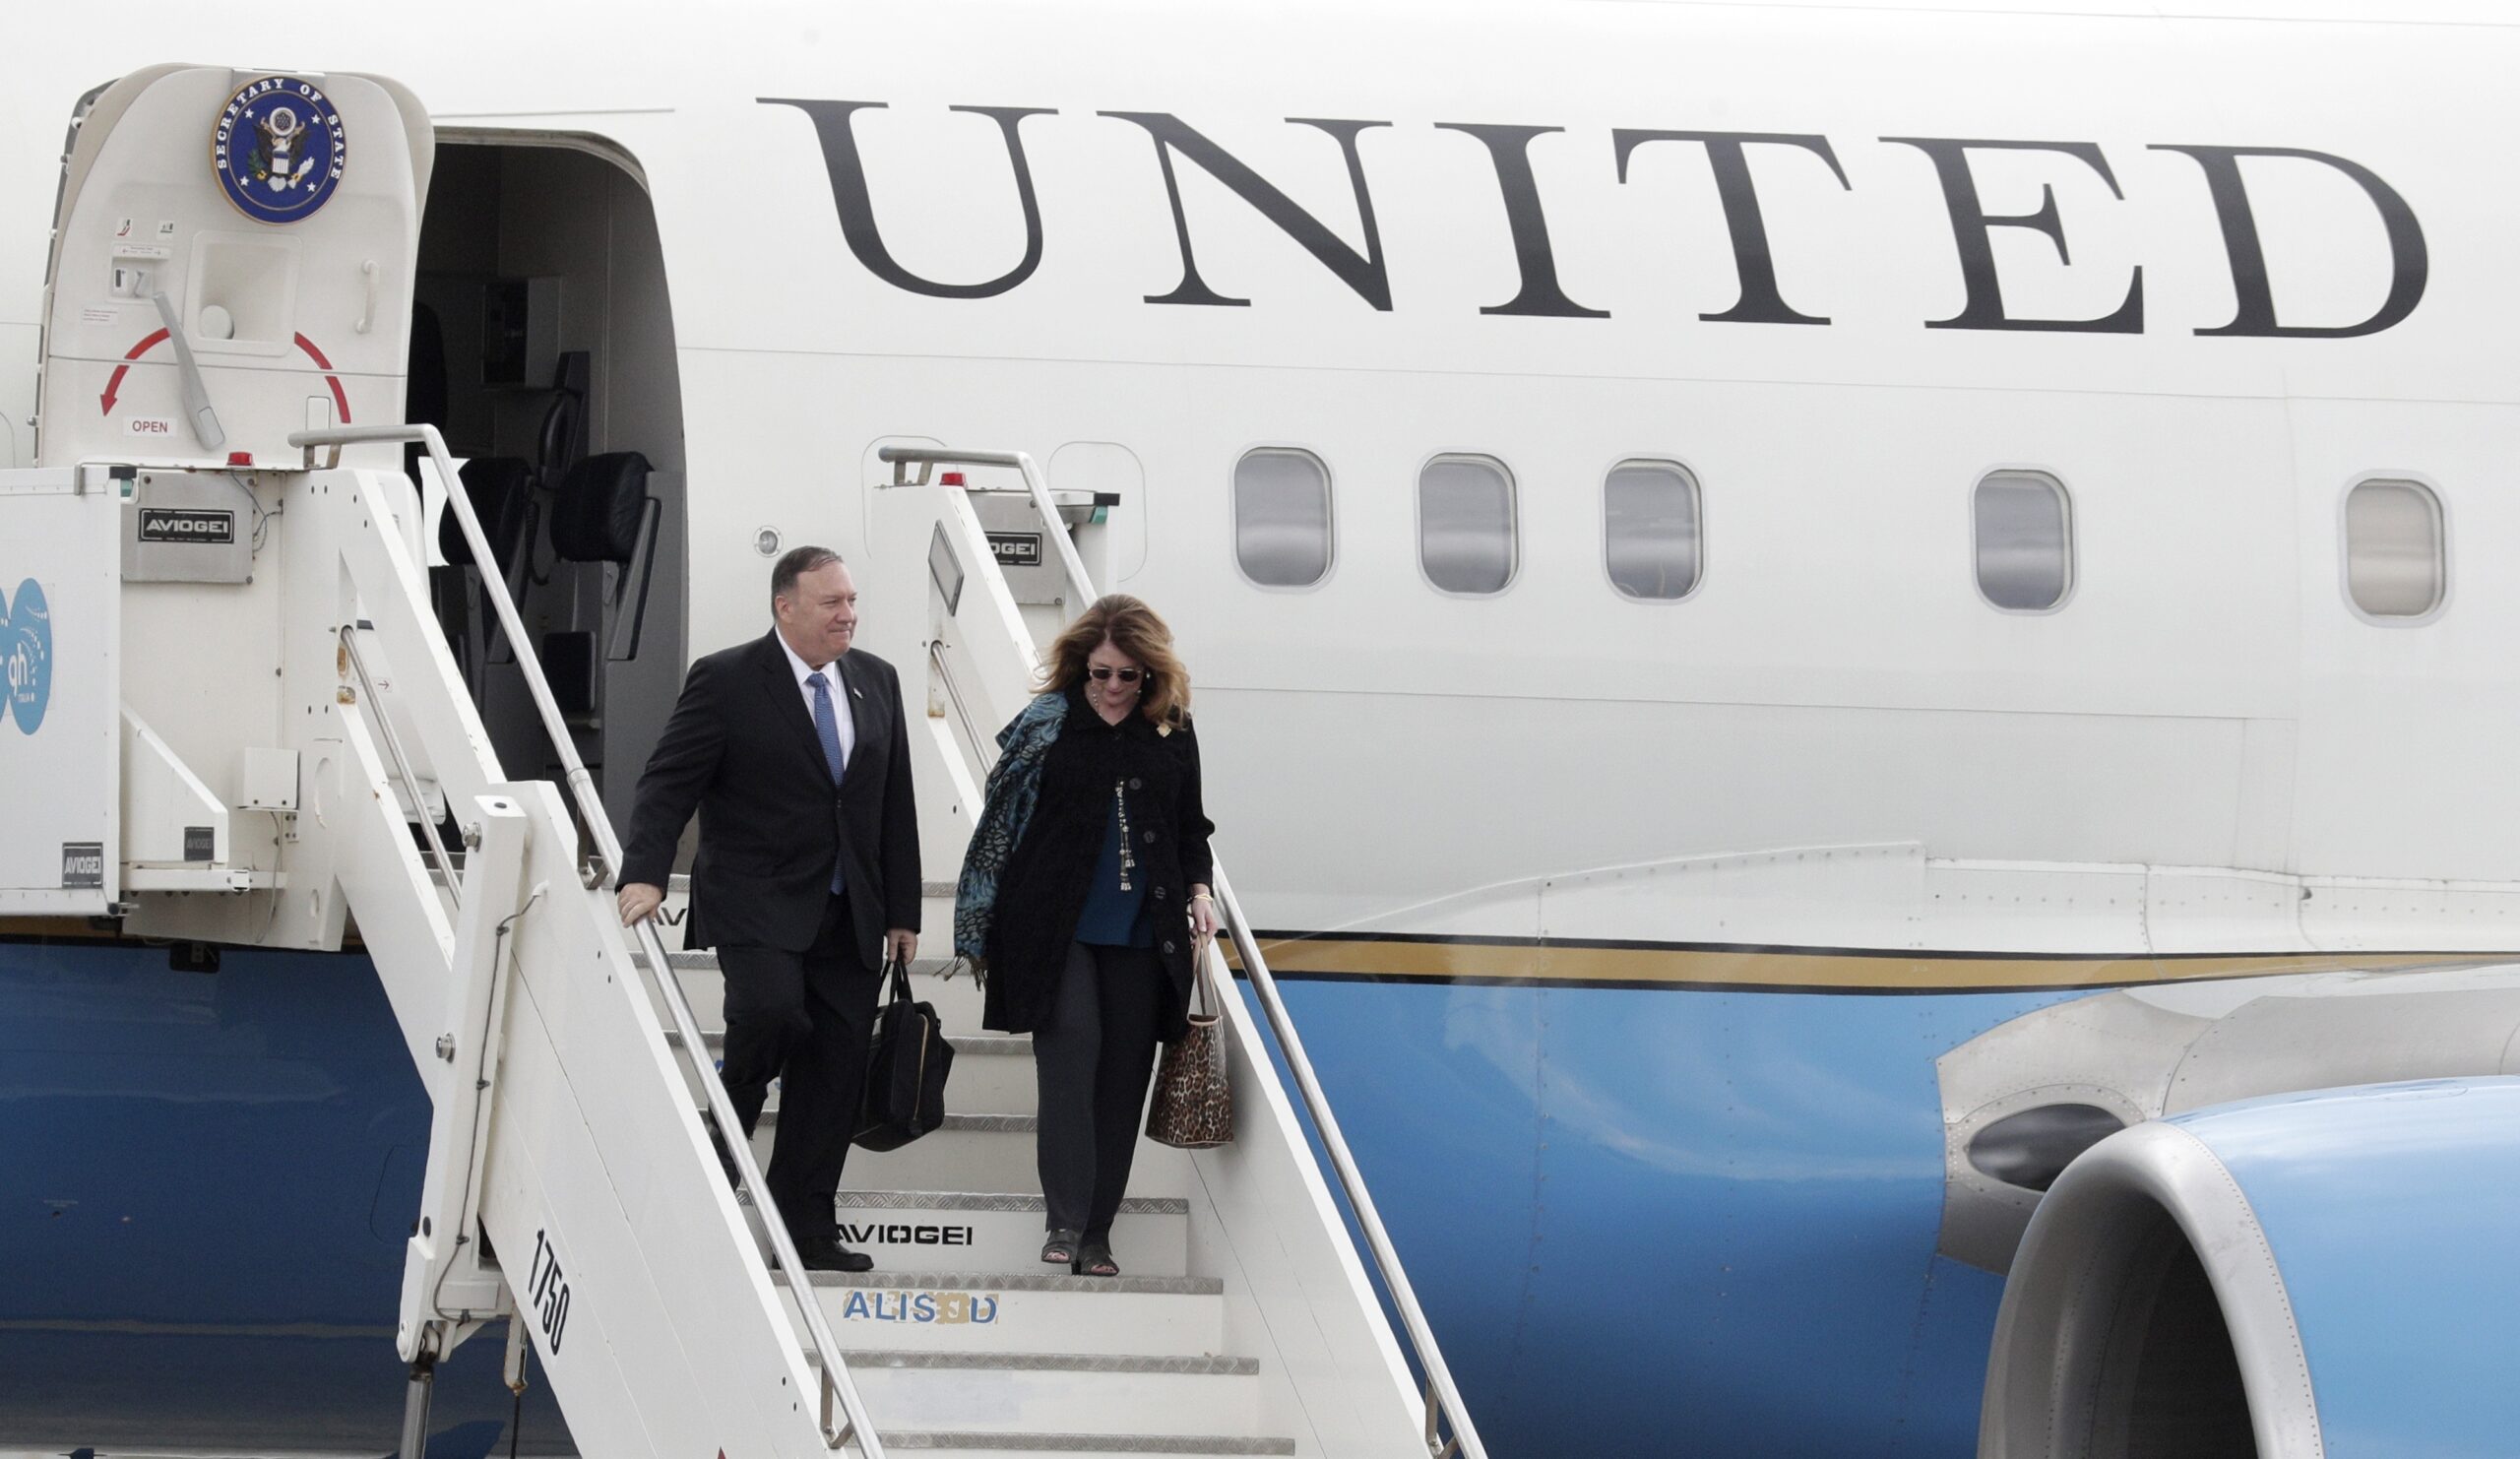 United States Secretary of State Mike Pompeo and his wife Susan Pompeo